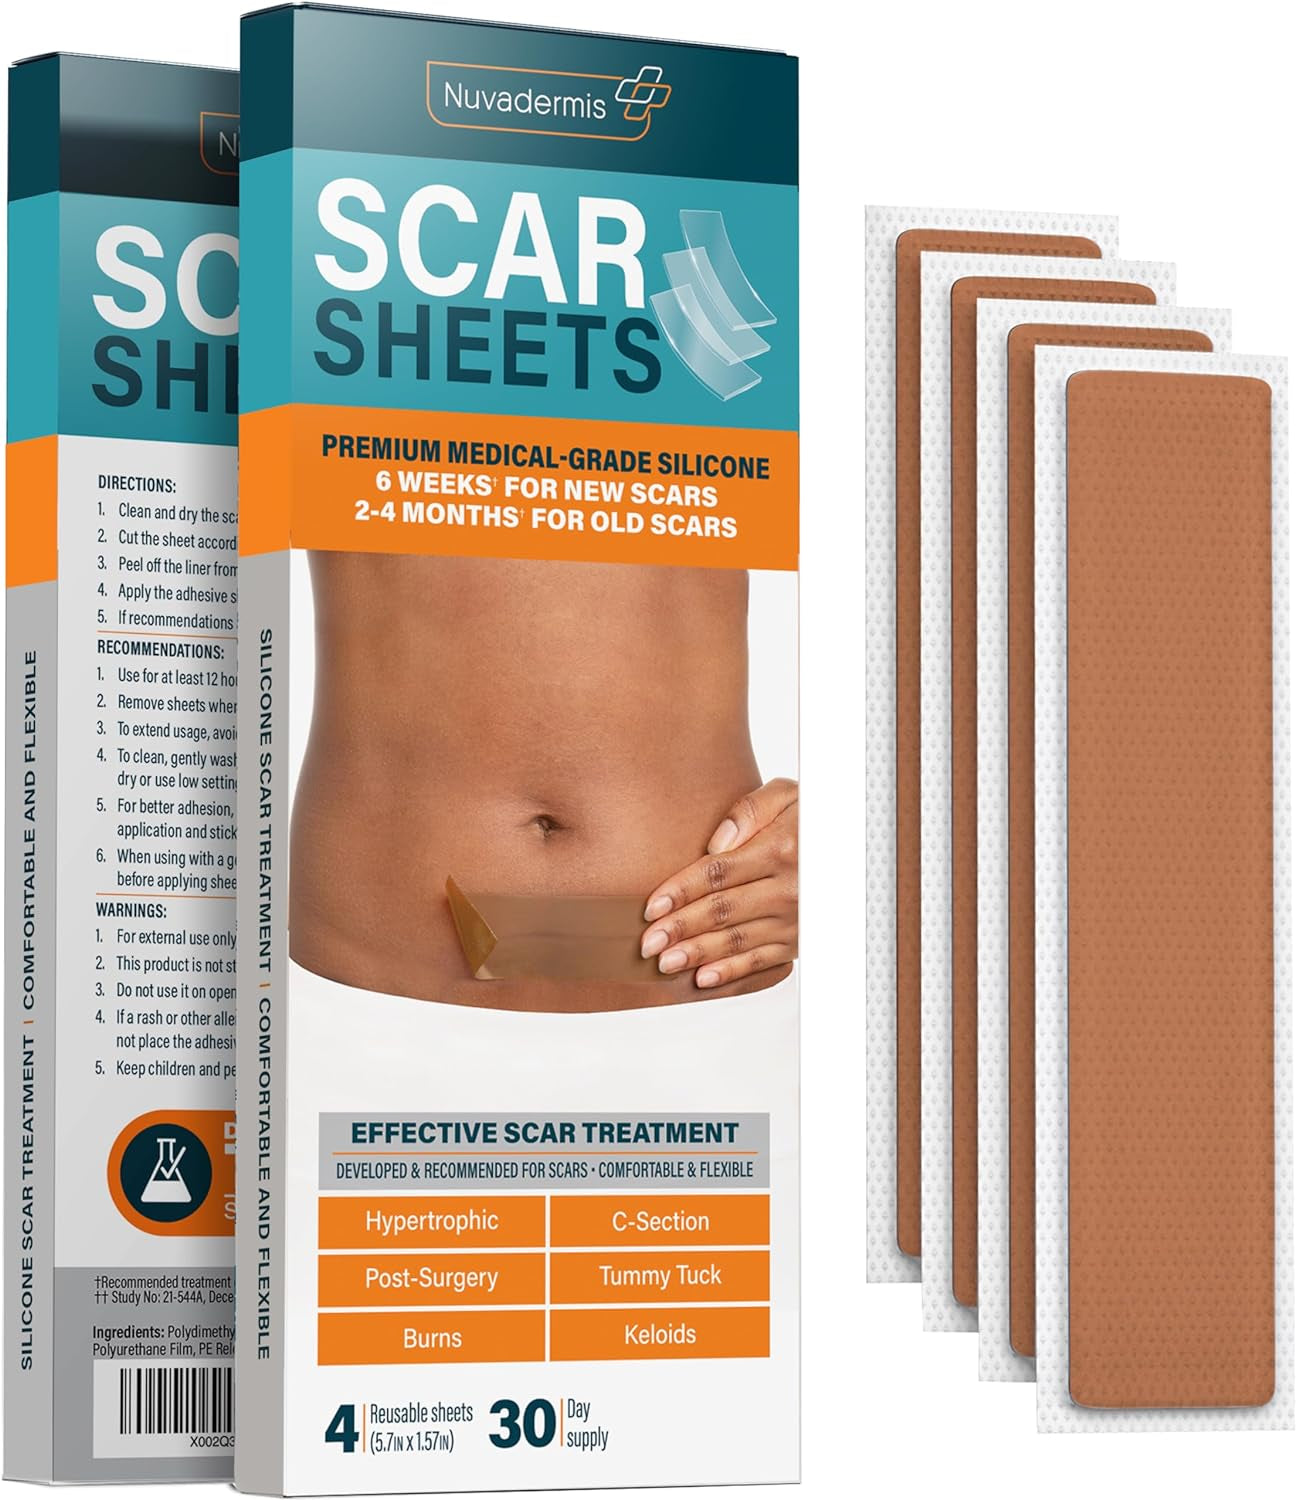 Silicone Scar Sheets - Extra Long Scar Sheets for C-Section